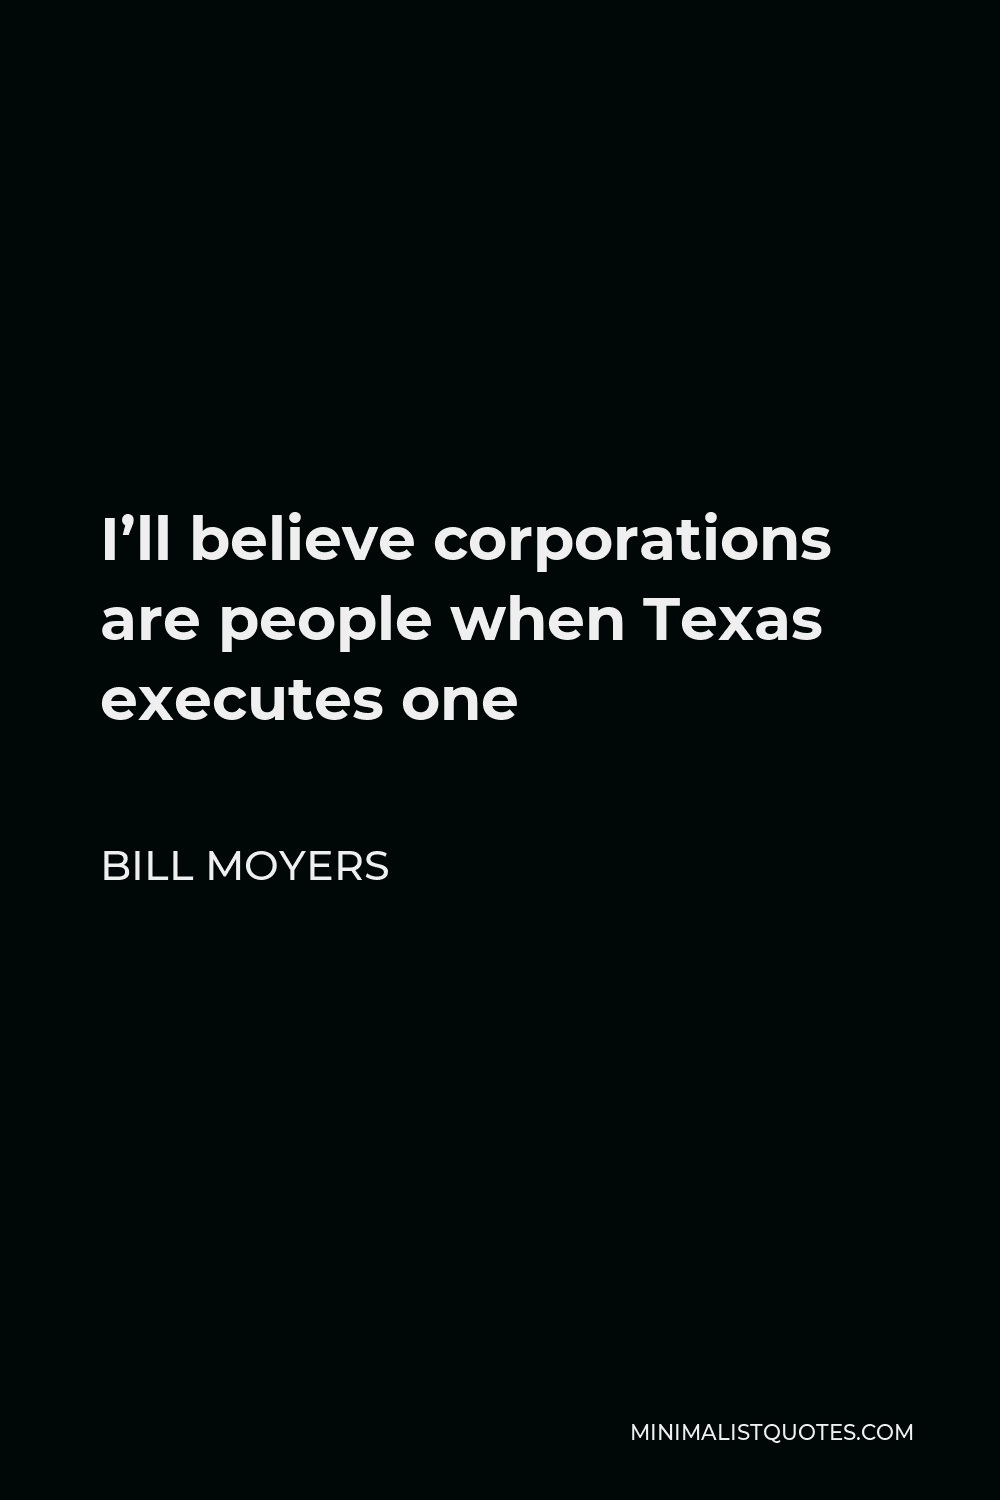 Bill Moyers Quote - I’ll believe corporations are people when Texas executes one